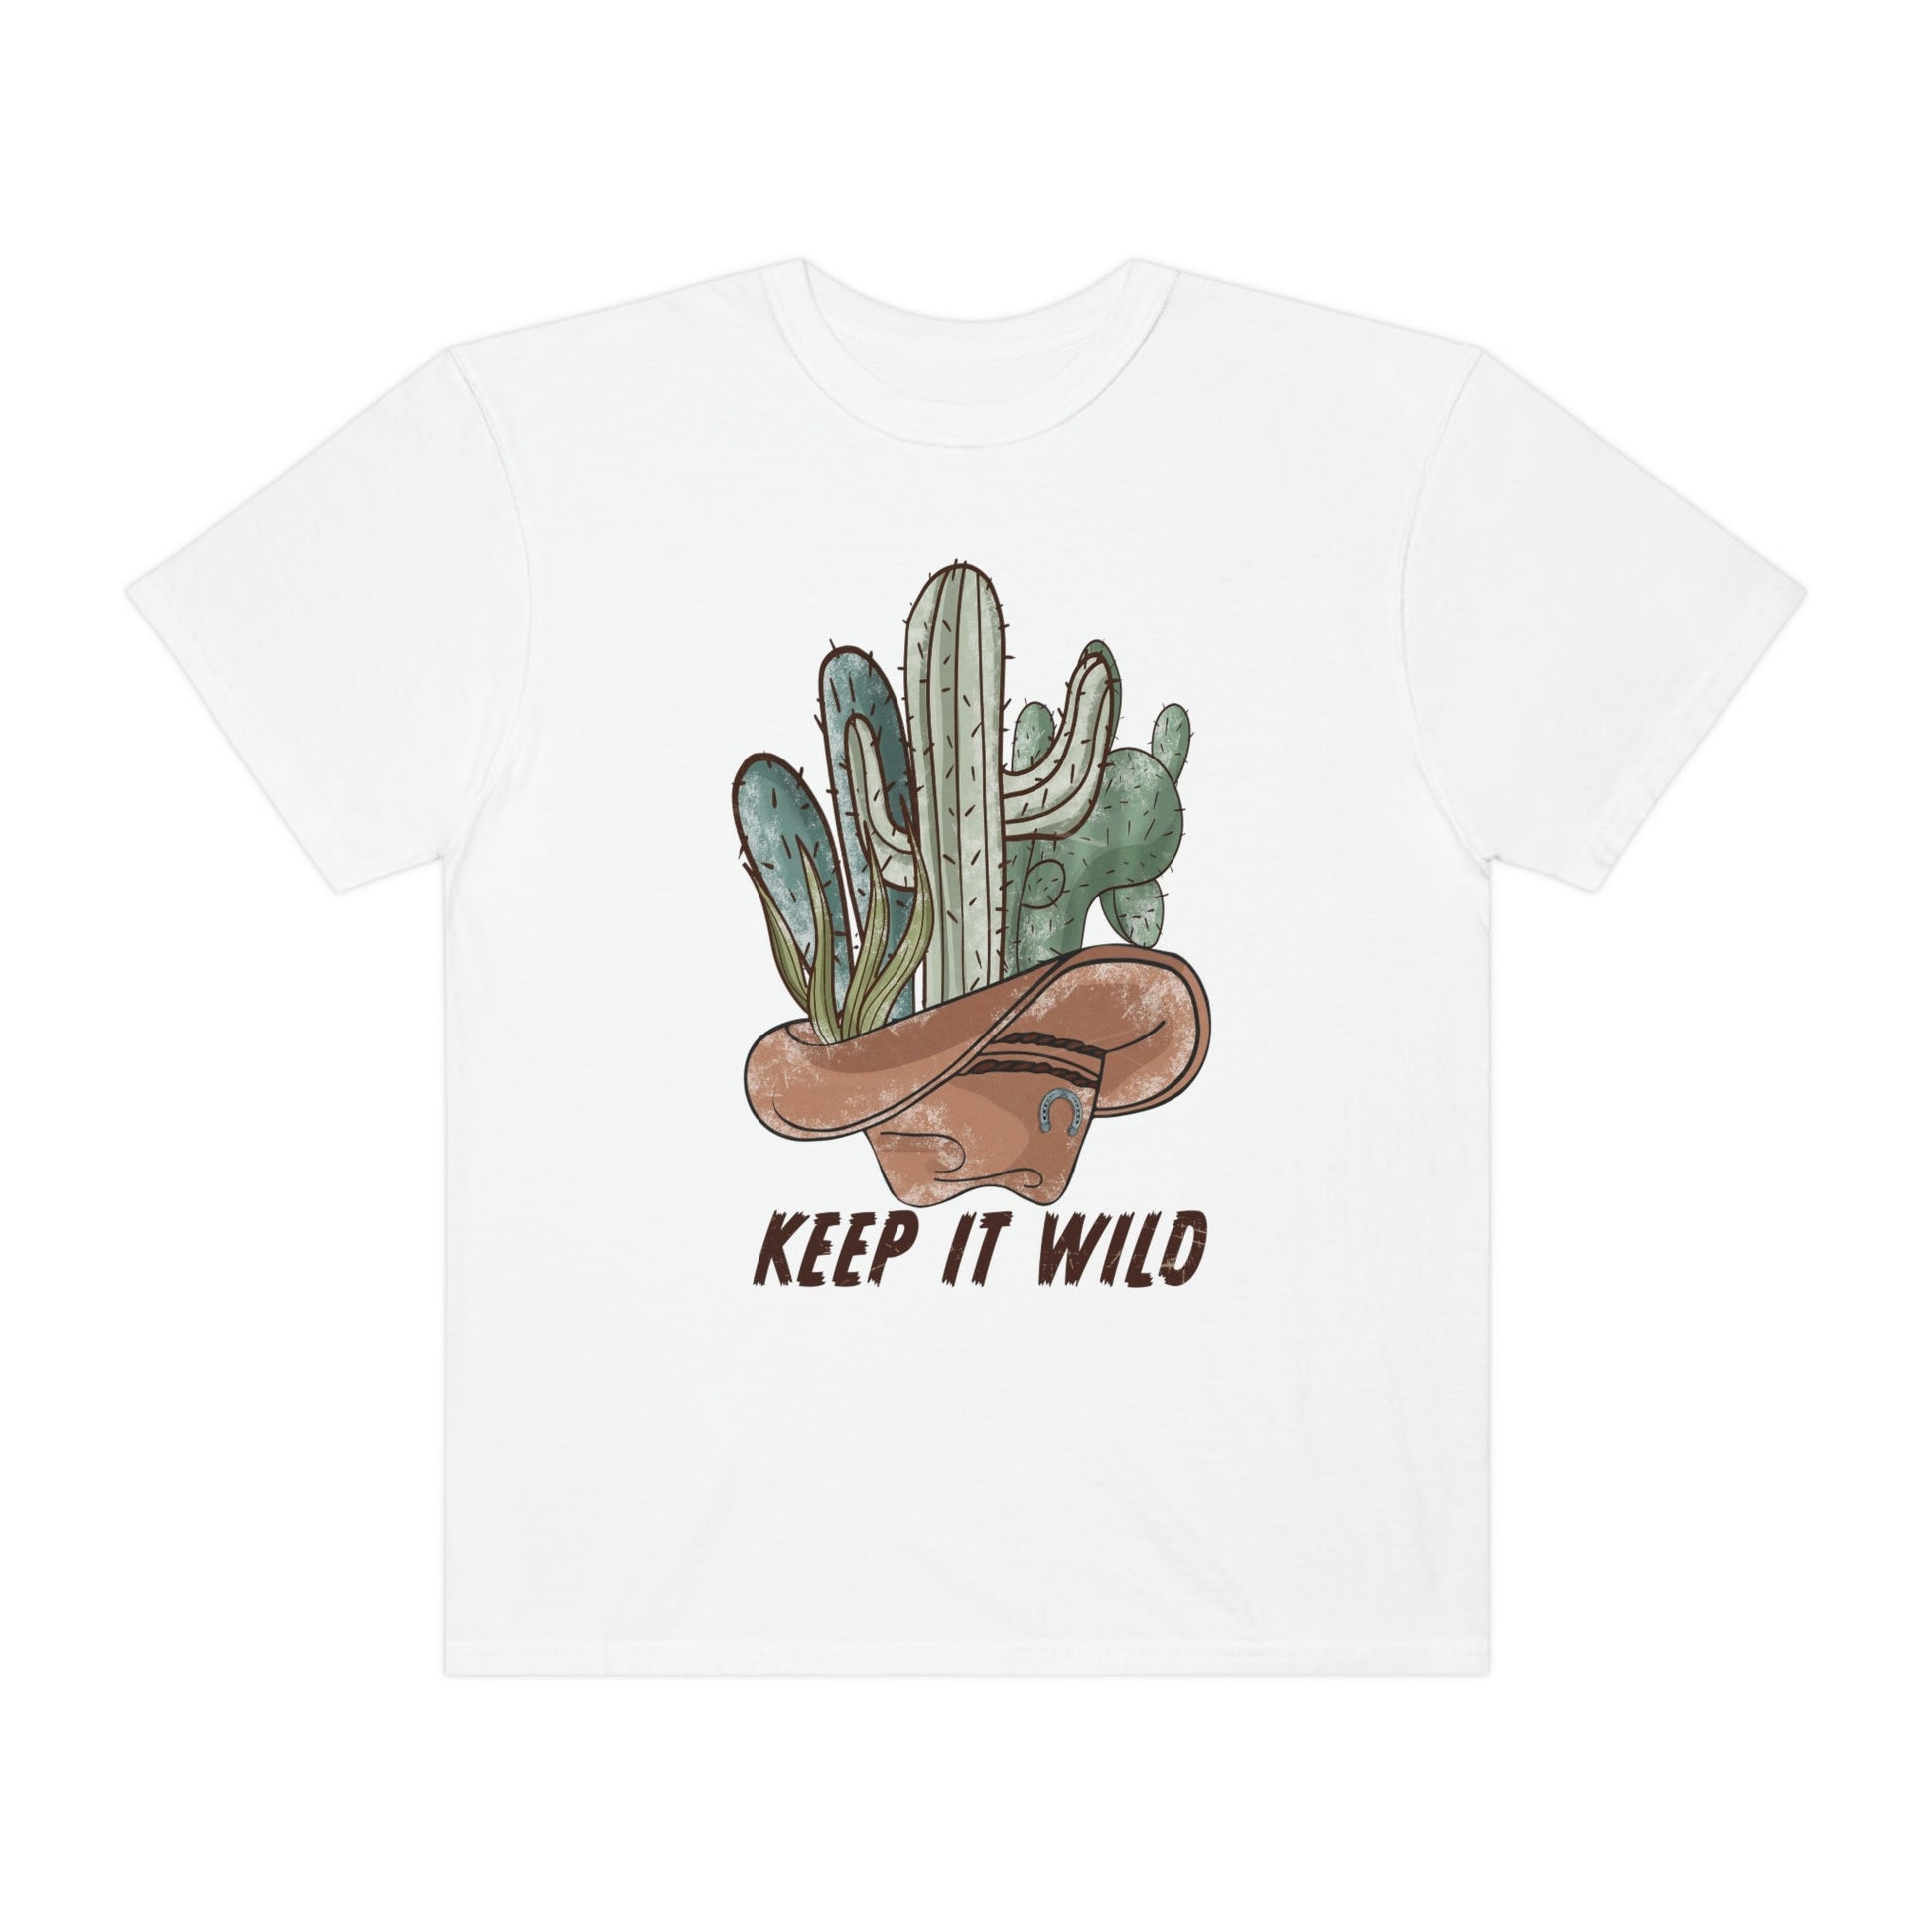 Keep It Wild Cactus Shirt, Comfort Colors Funny Western Graphic Tee | Cowgirl T-Shirt